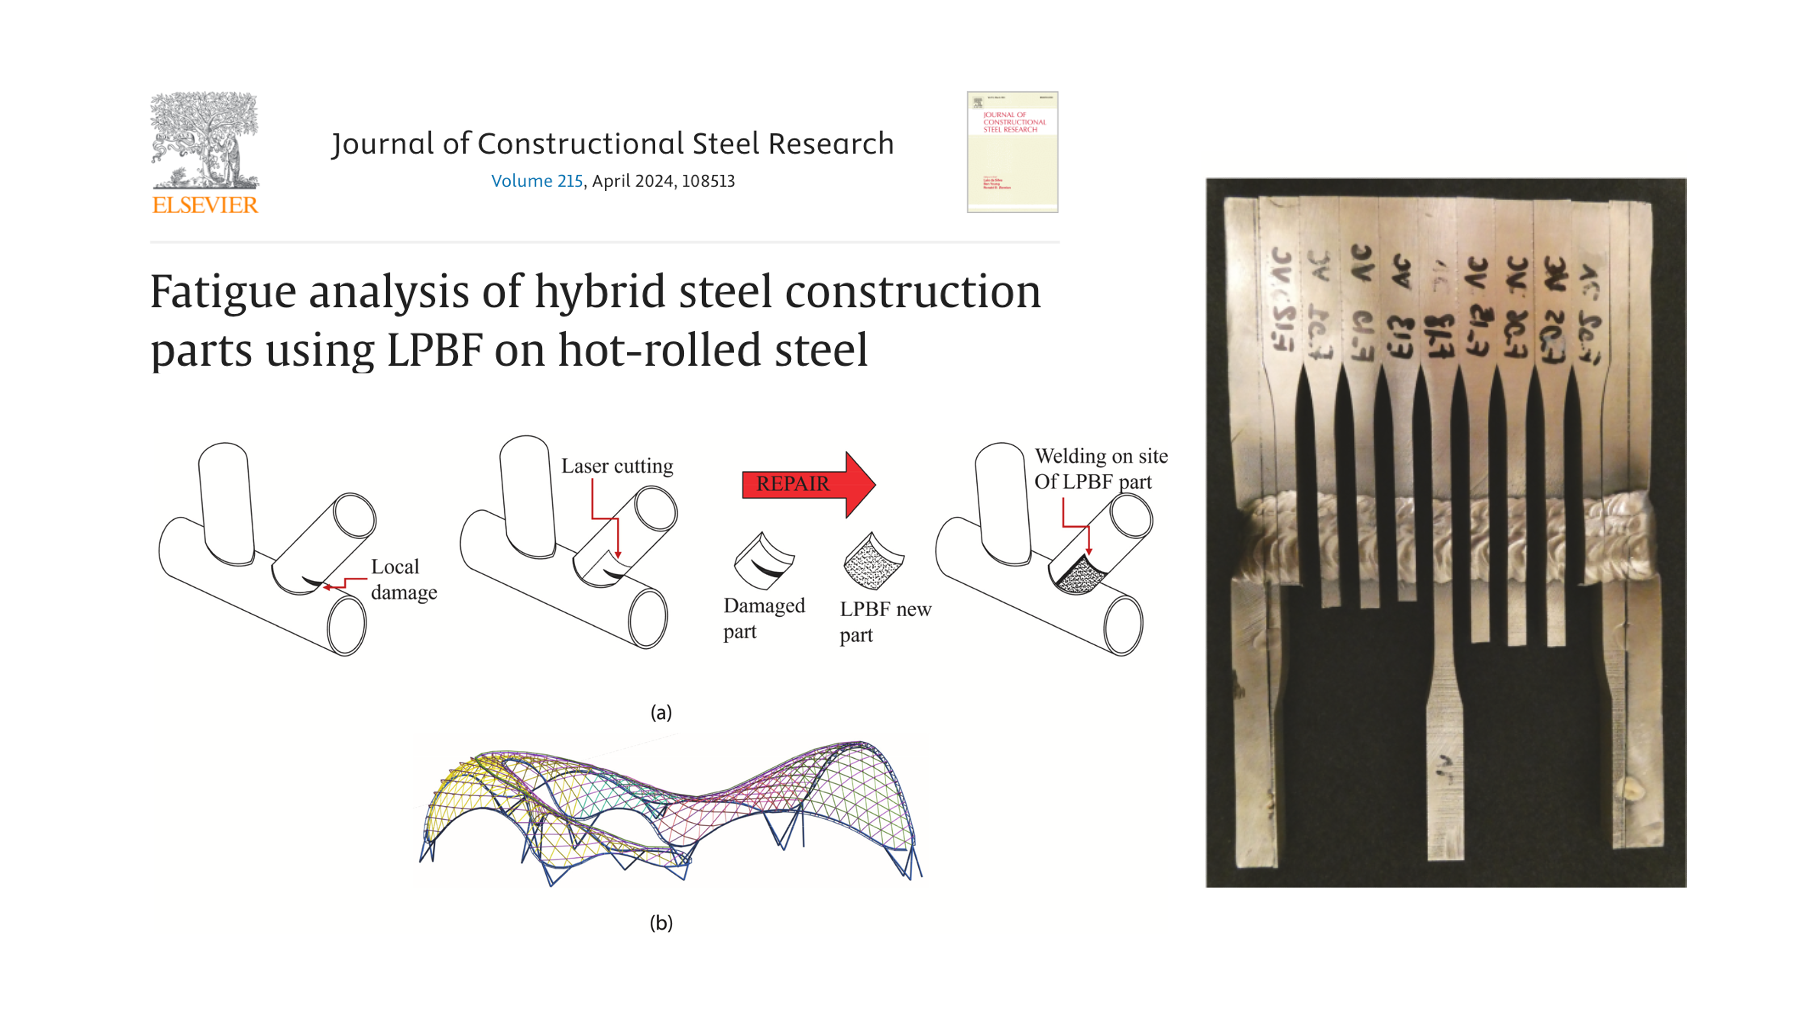 New article “Fatigue analysis of hybrid steel construction parts using LPBF on hot-rolled steel”